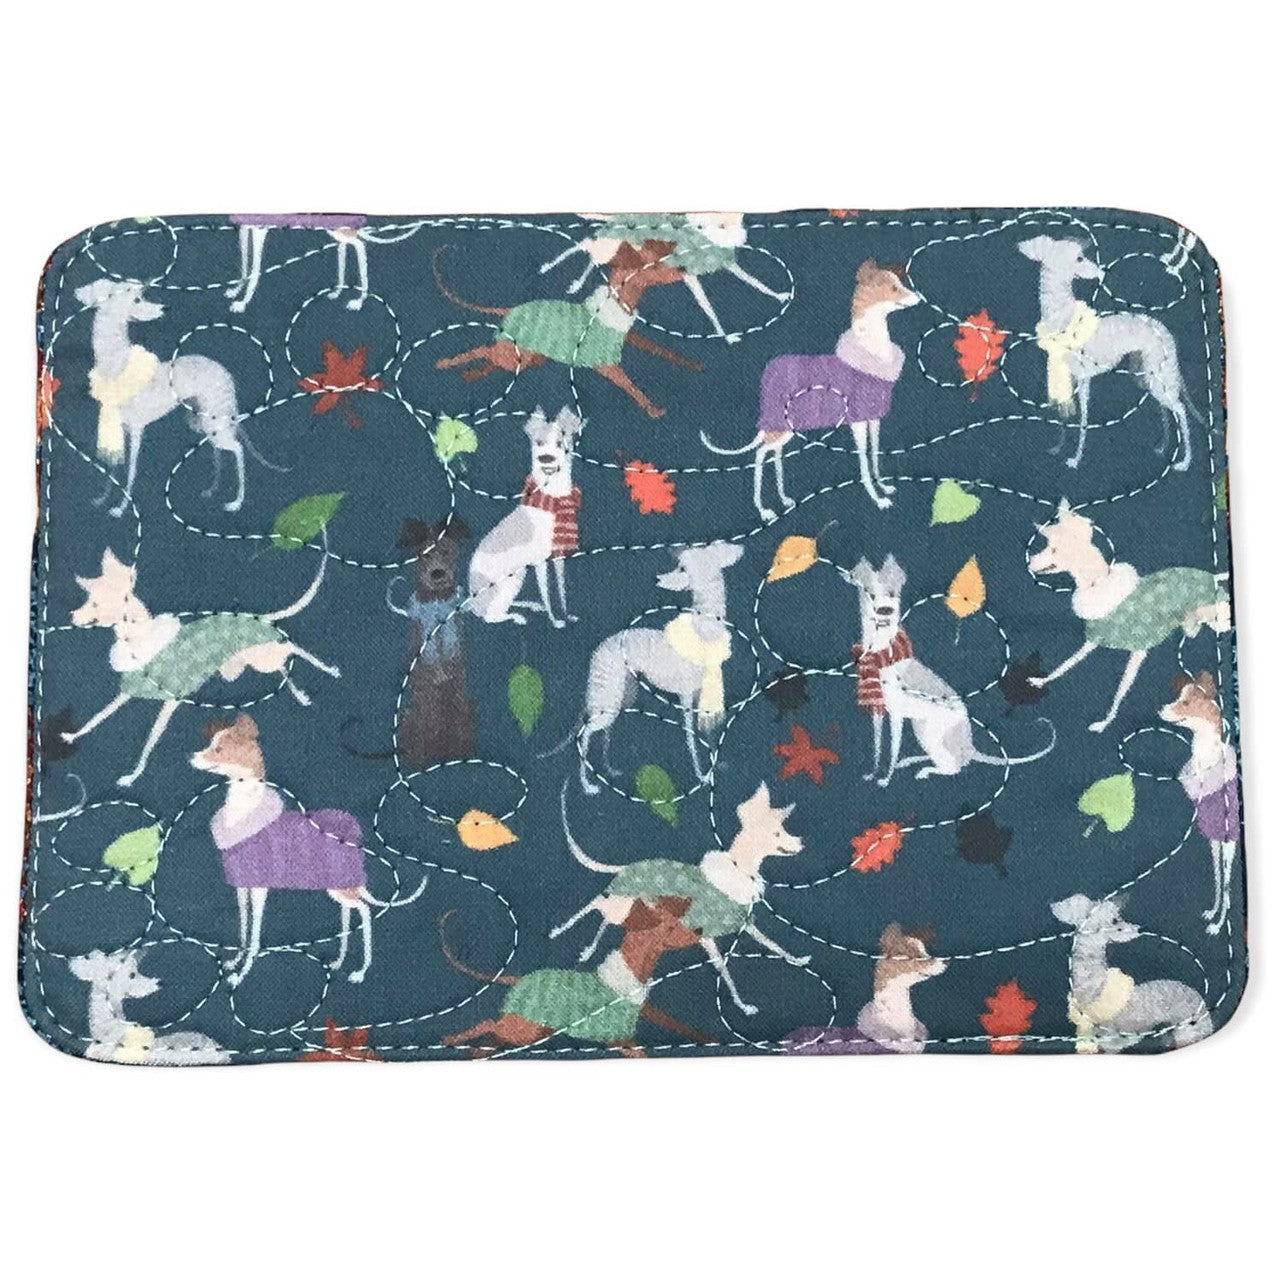 Mug Rug - Festive Fall Hounds Quilted Paw Prints